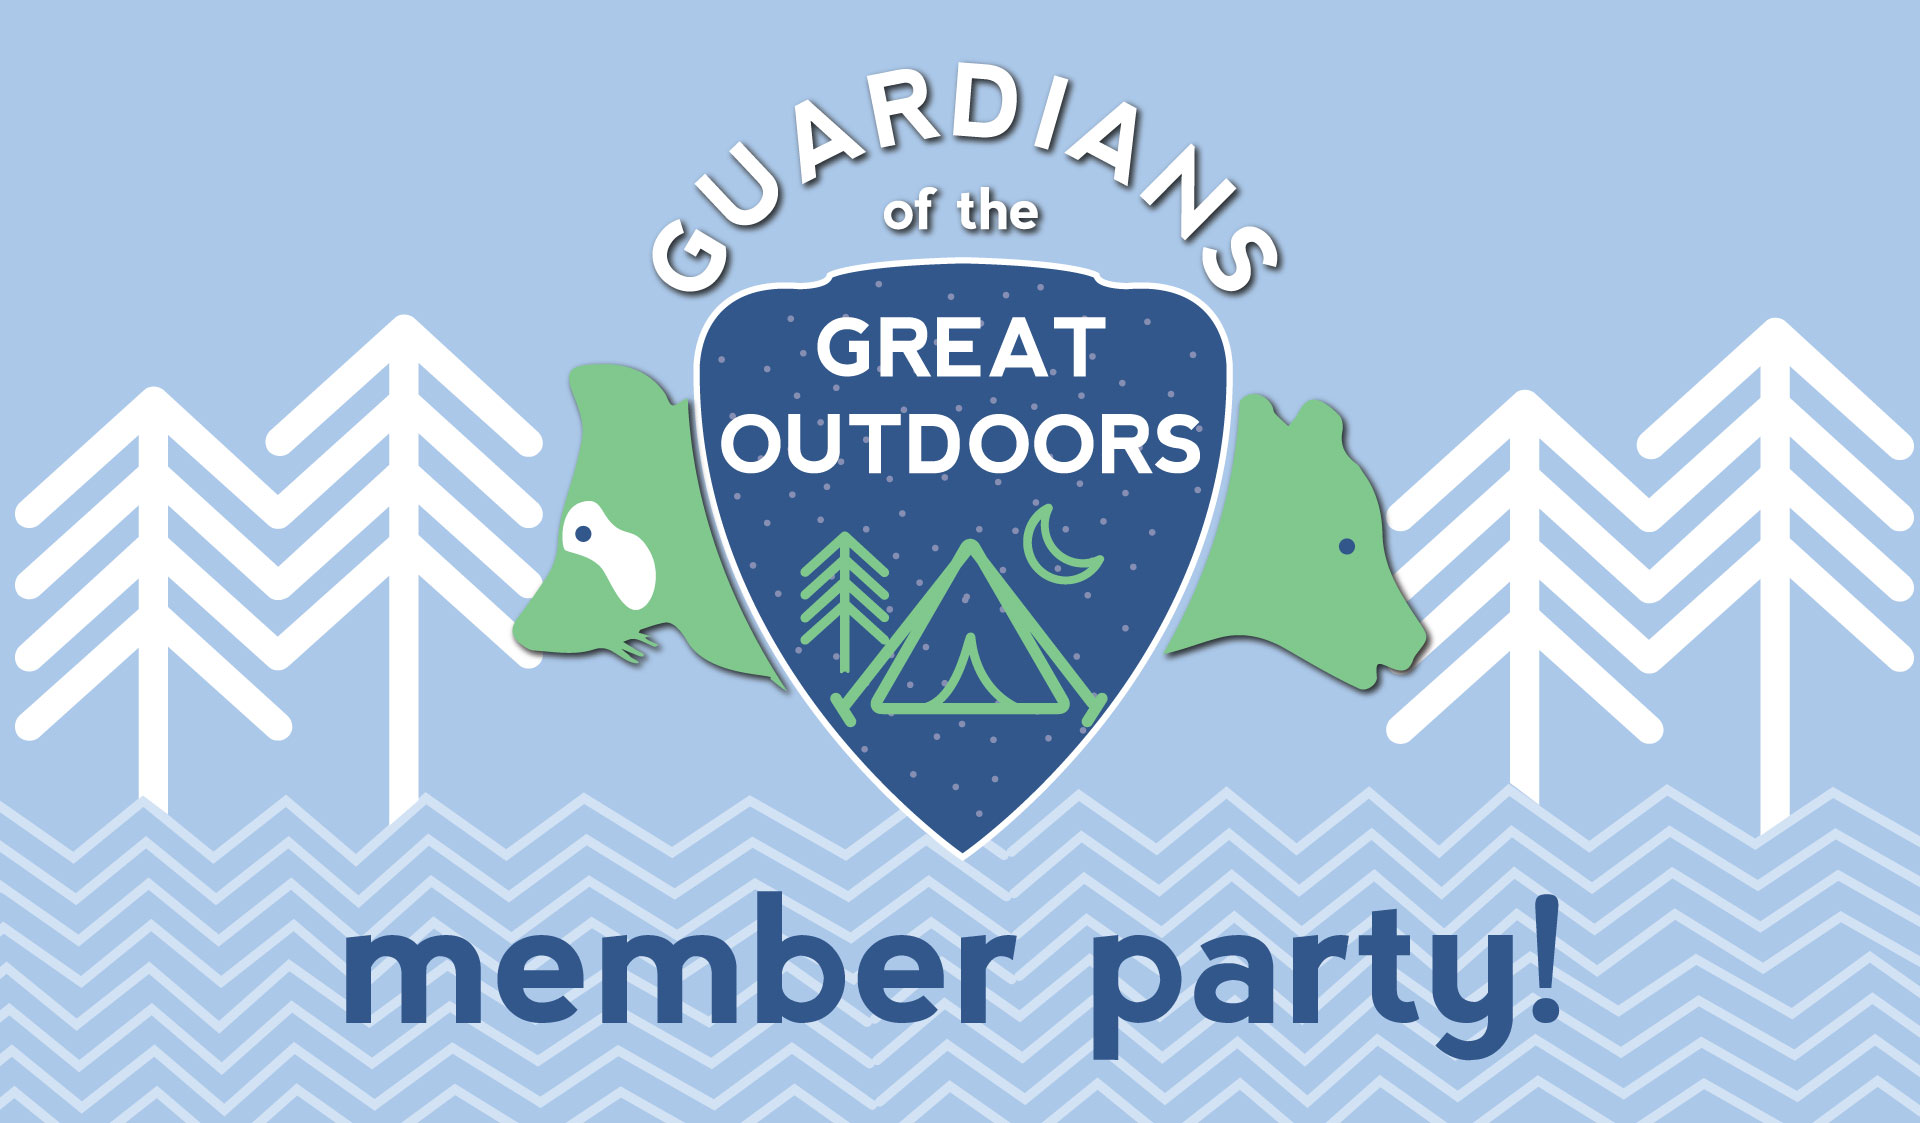 Guardians of the Great Outdoors Member Party!